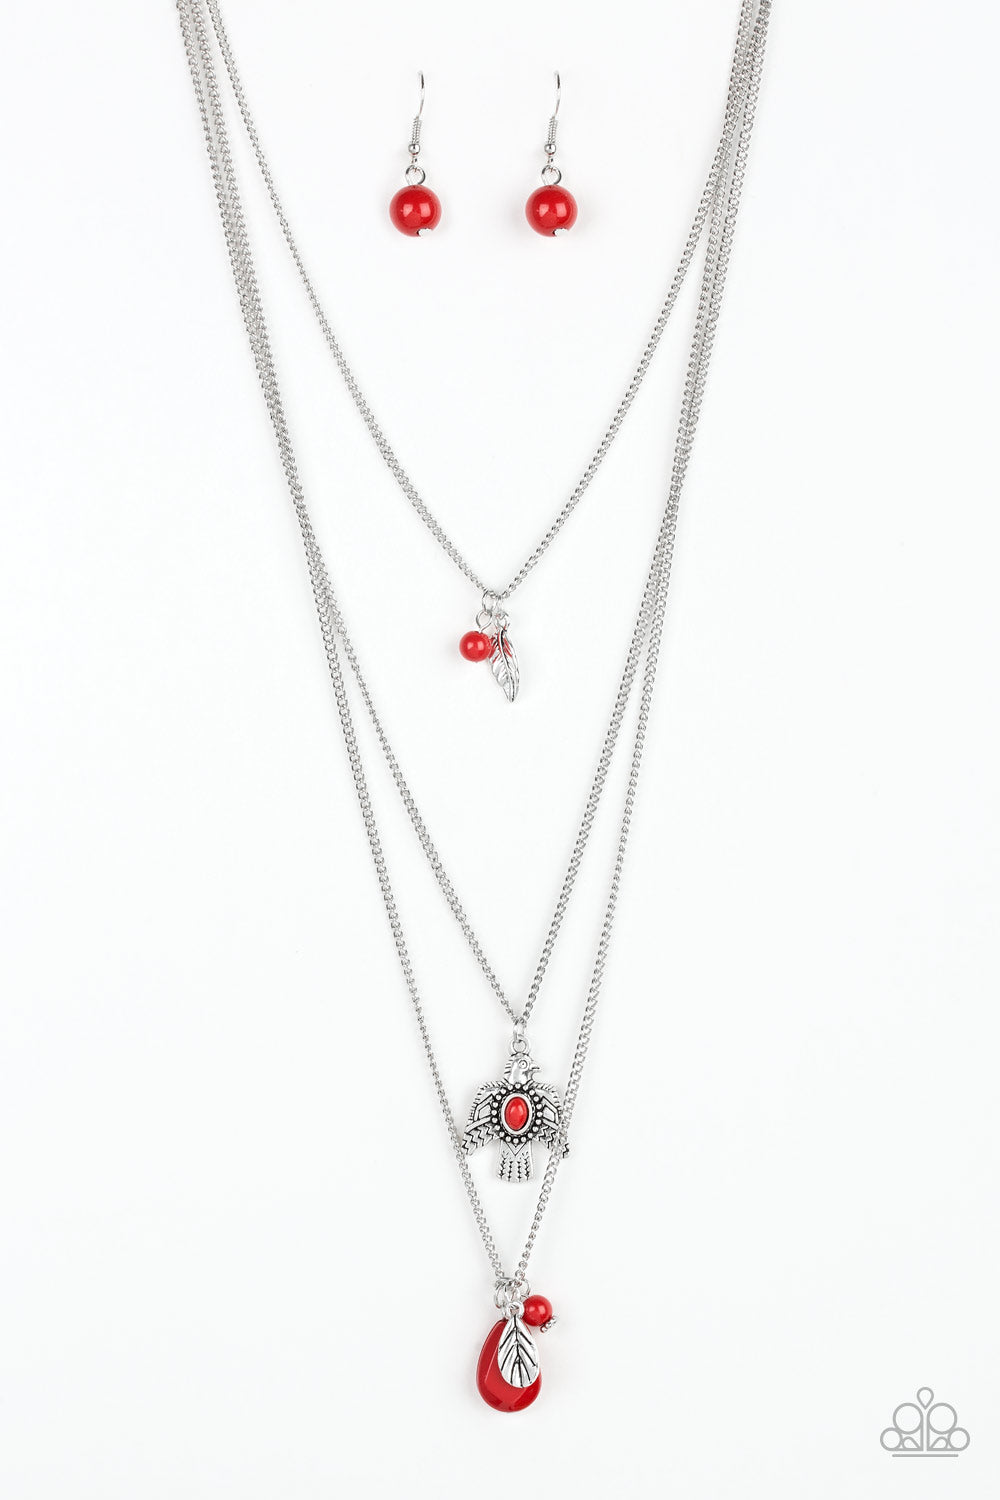 Soar With The Eagles - red - Paparazzi necklace